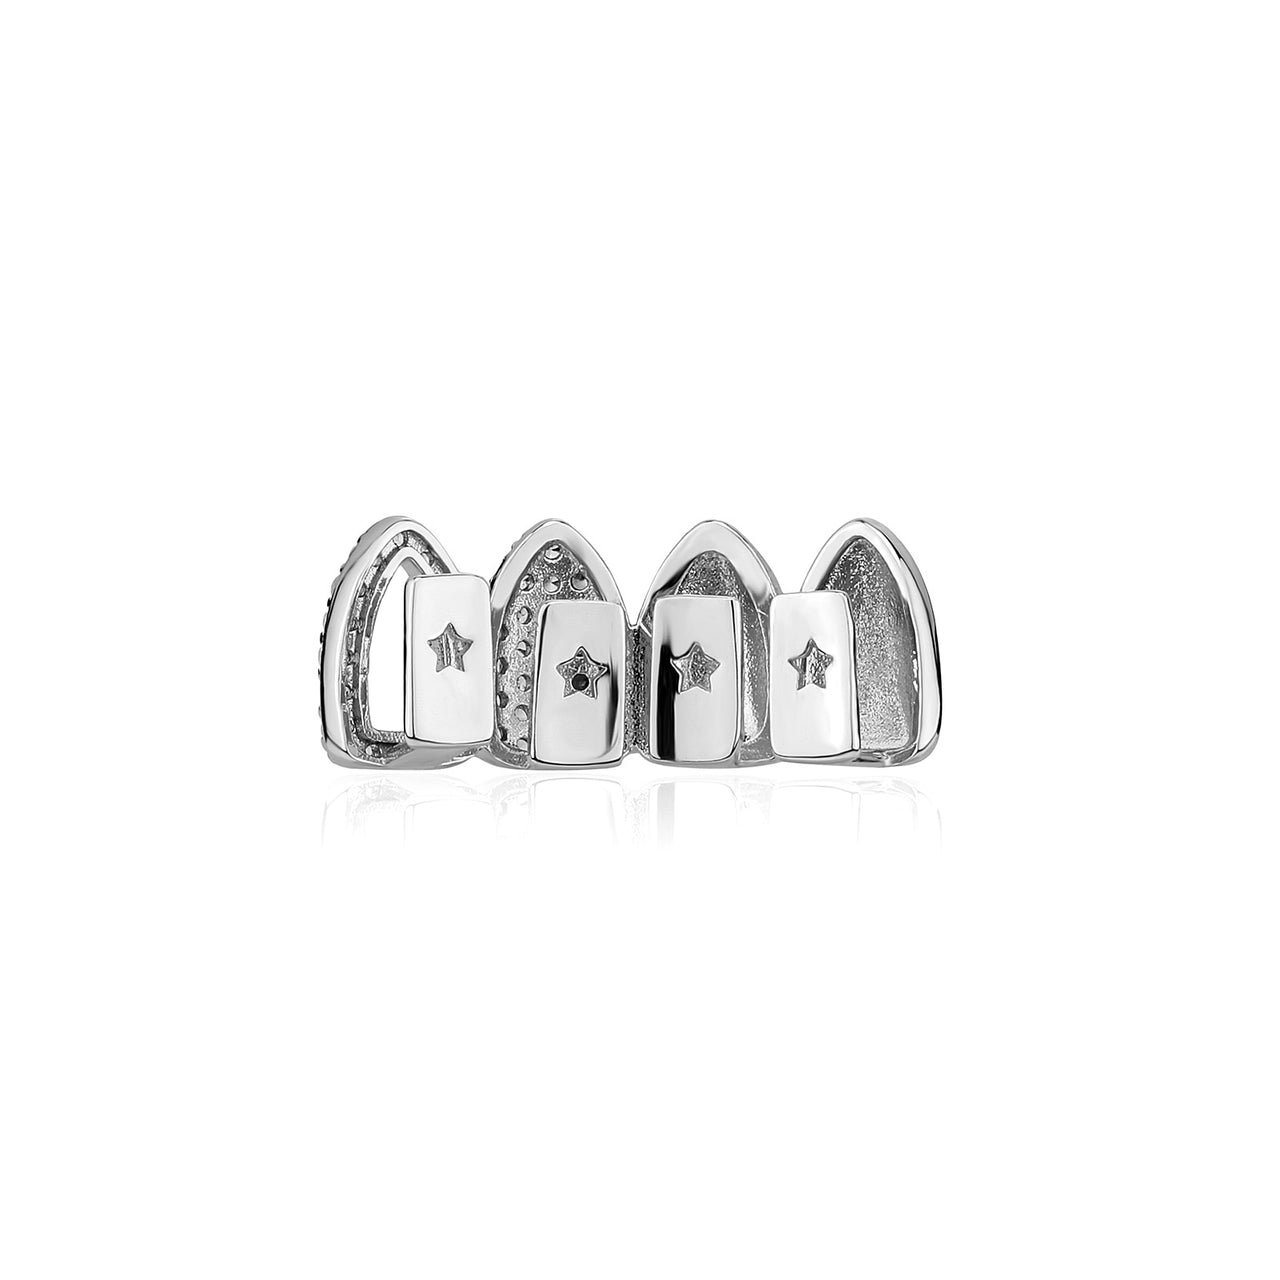 Iced Enamel 4 Front Tooth Grillz - Different Drips